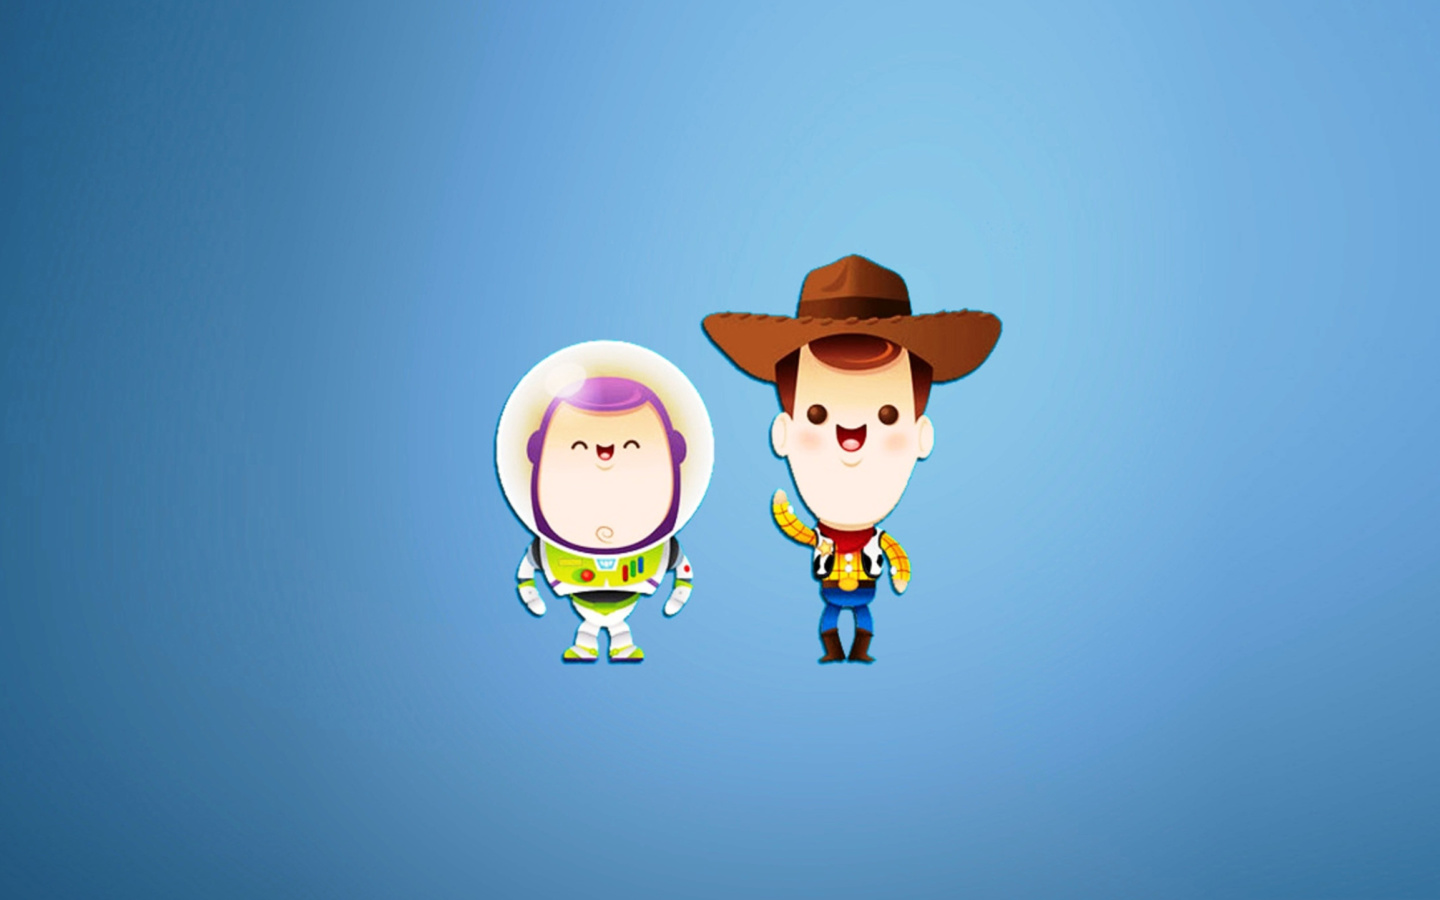 Buzz and Woody in Toy Story wallpaper 1440x900